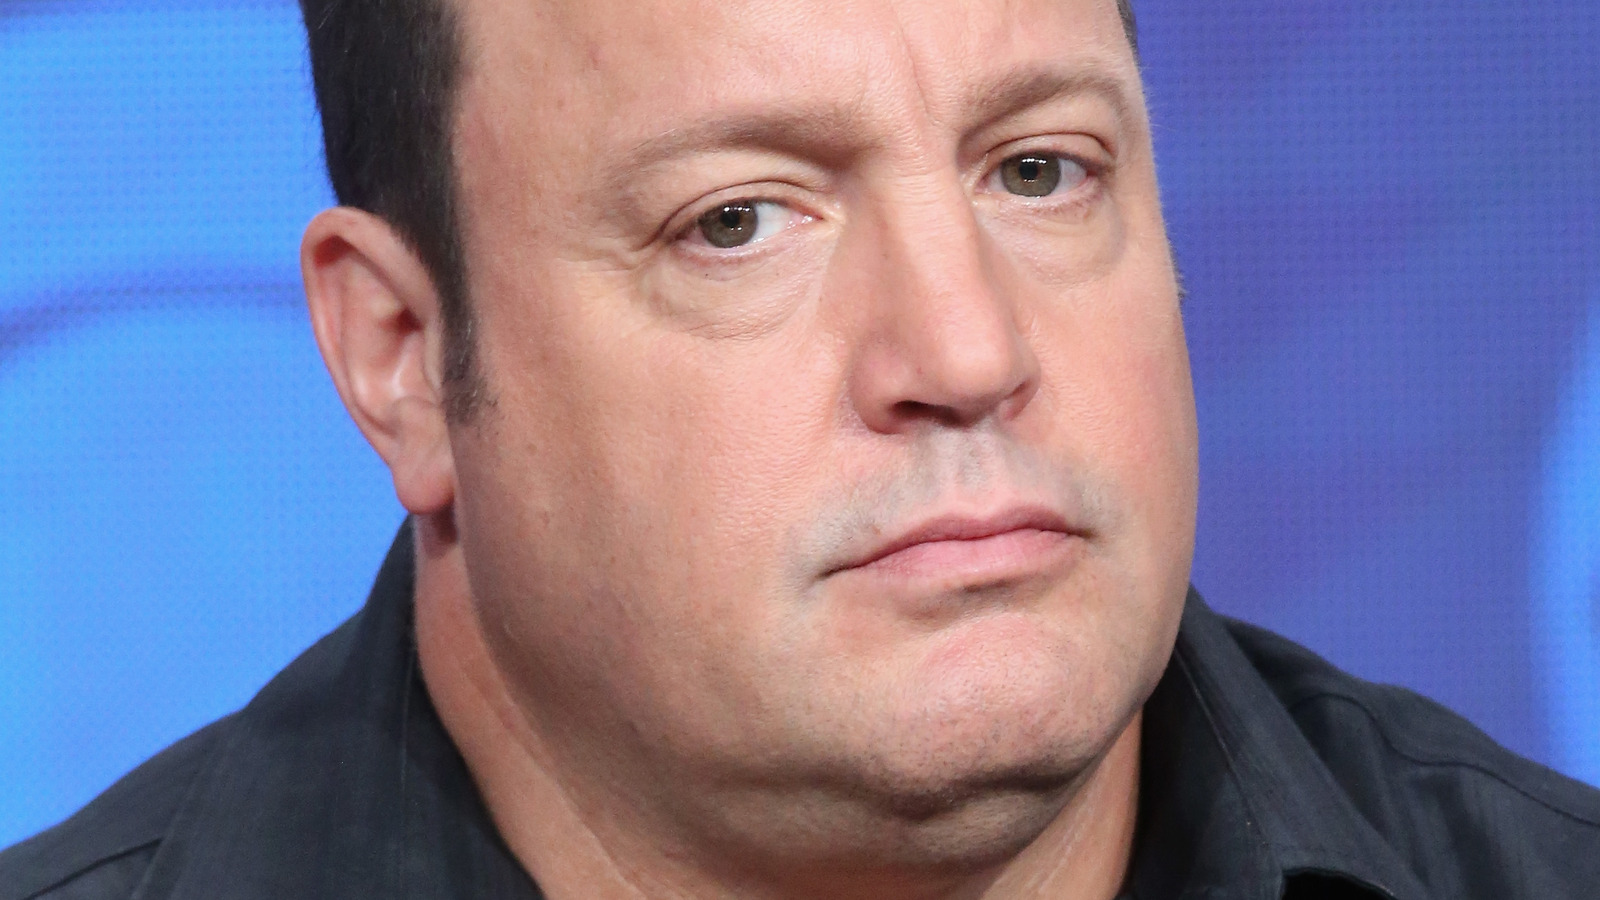 Kevin James: Biography, Actor, King of Queens